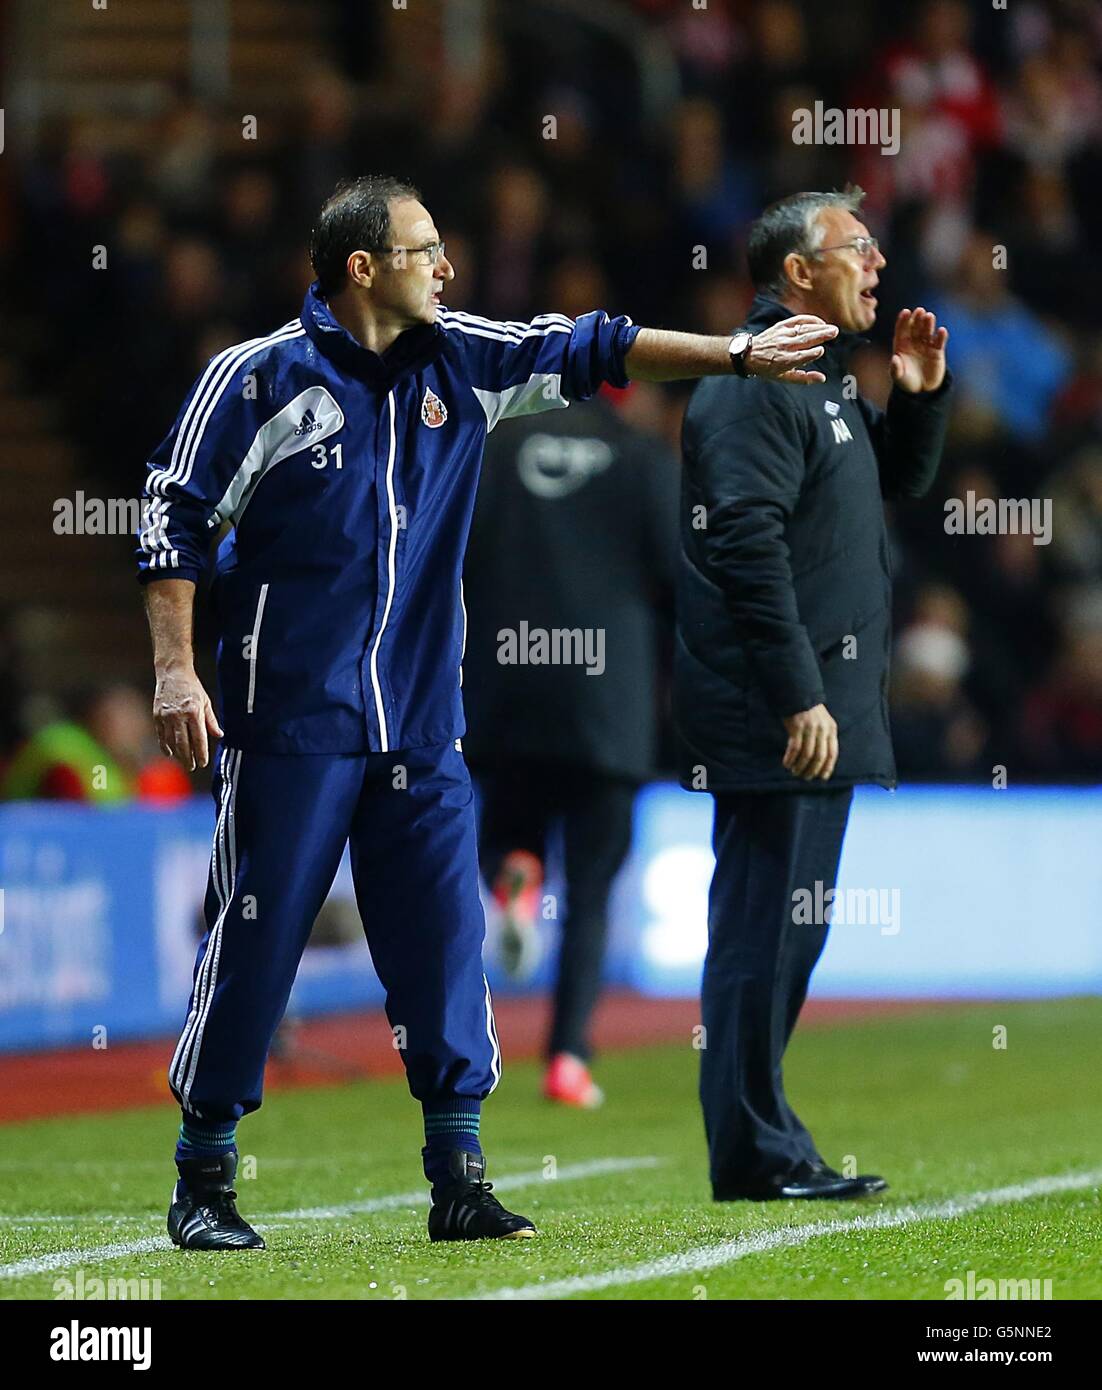 Soccer - Barclays Premier League - Southampton v Sunderland - St Mary's. Sunderland manager Martin O'Neill (left) and Southampton manager Nigel Adkins on the touchline Stock Photo